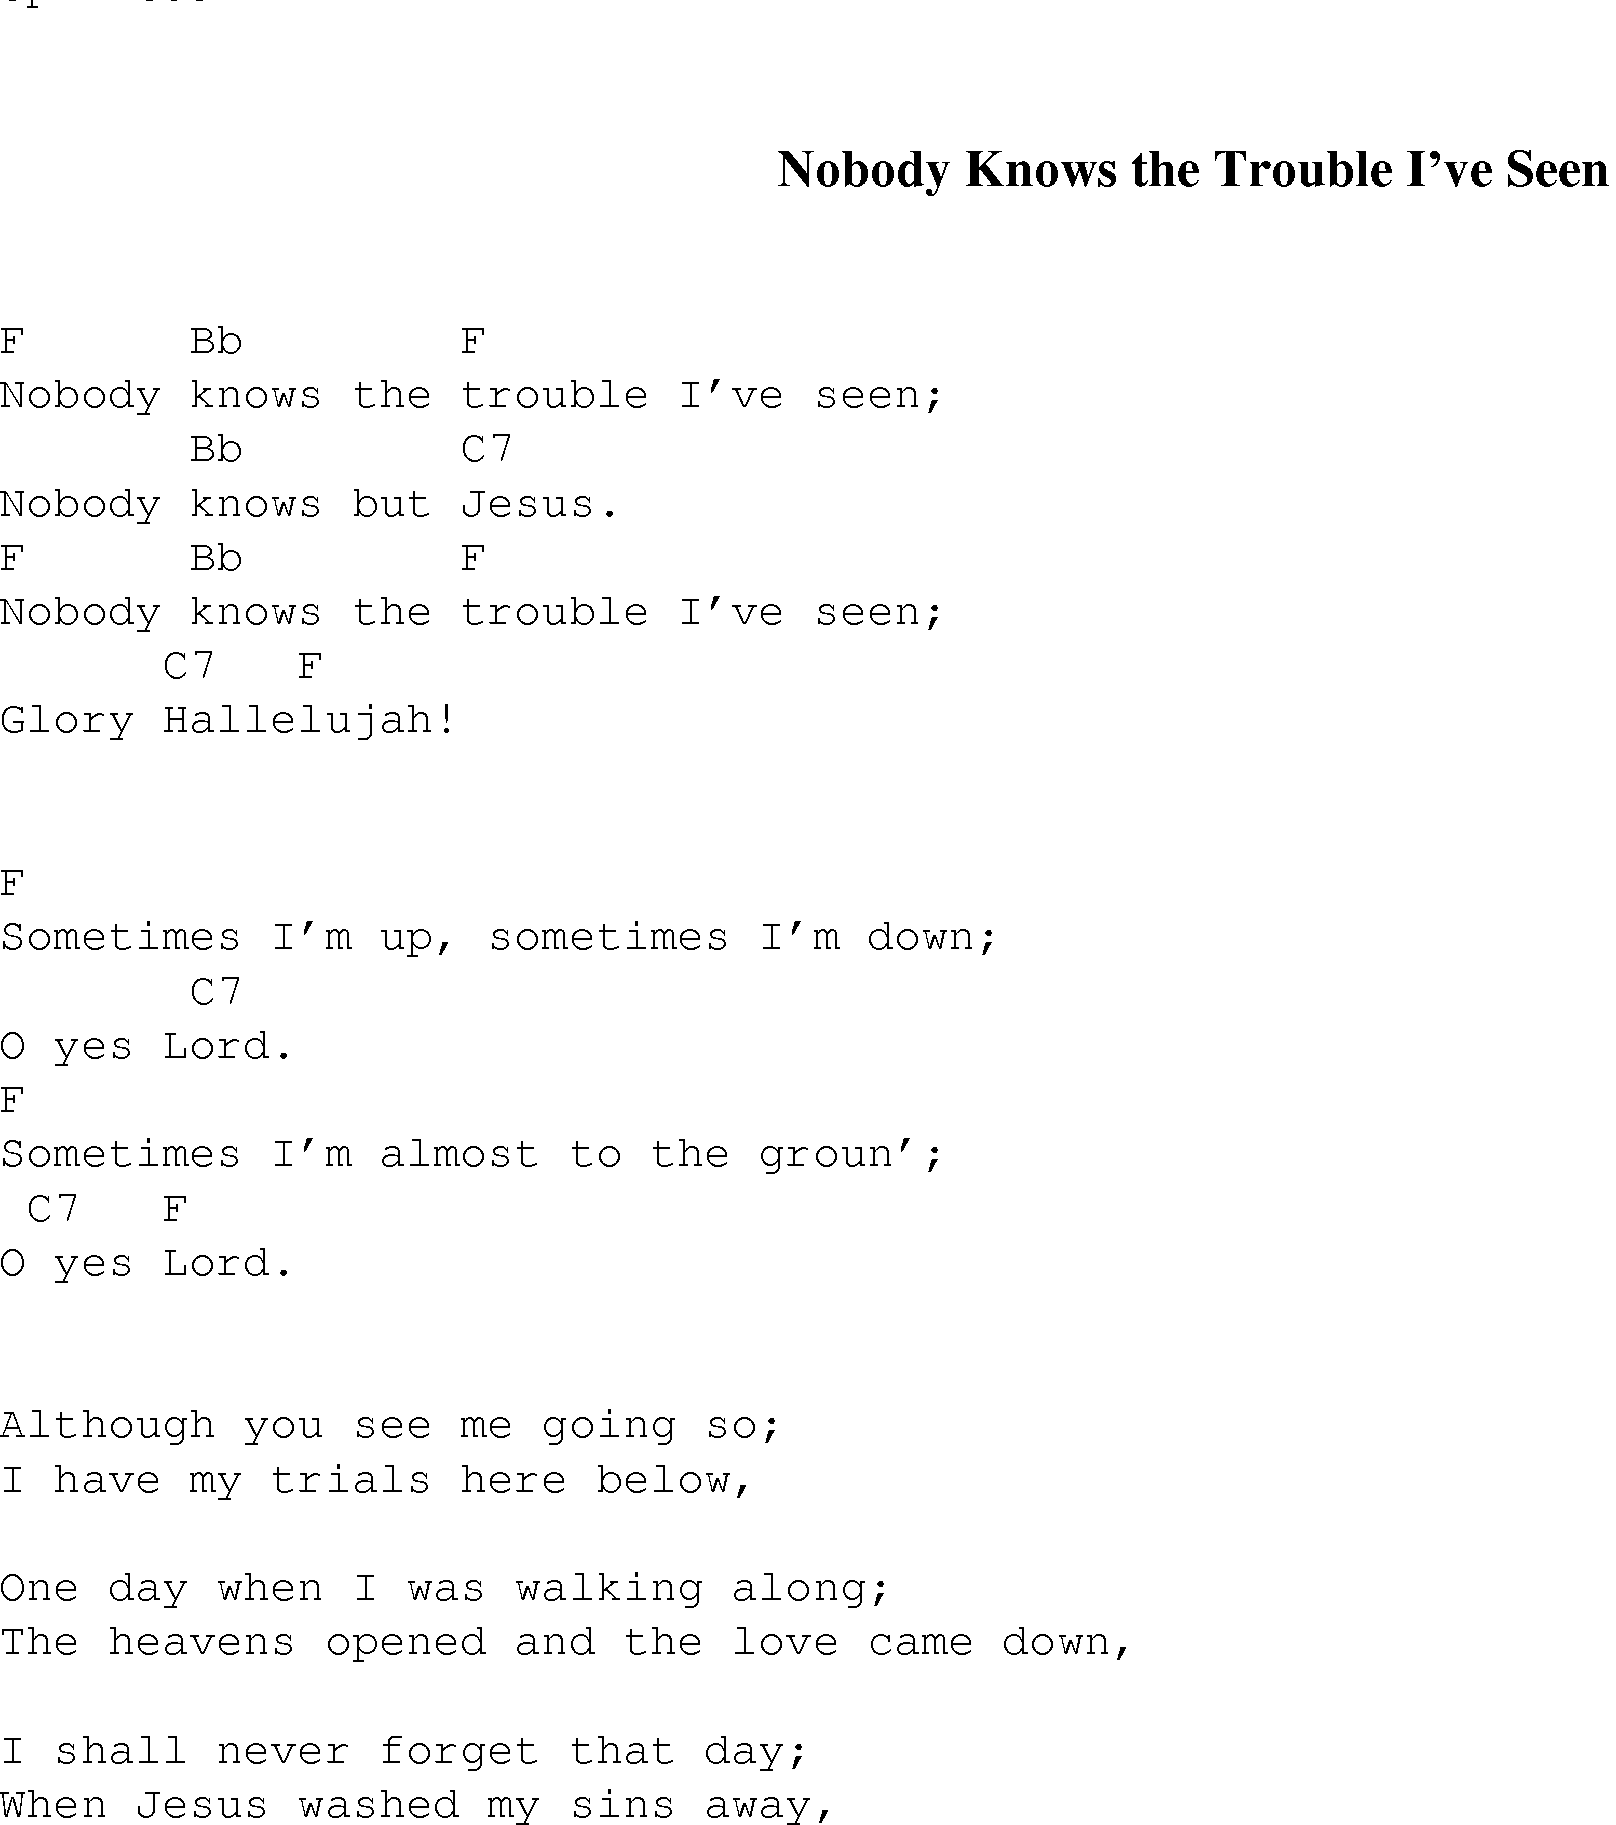 Gospel Song: nobody_knows_the_trouble, lyrics and chords.